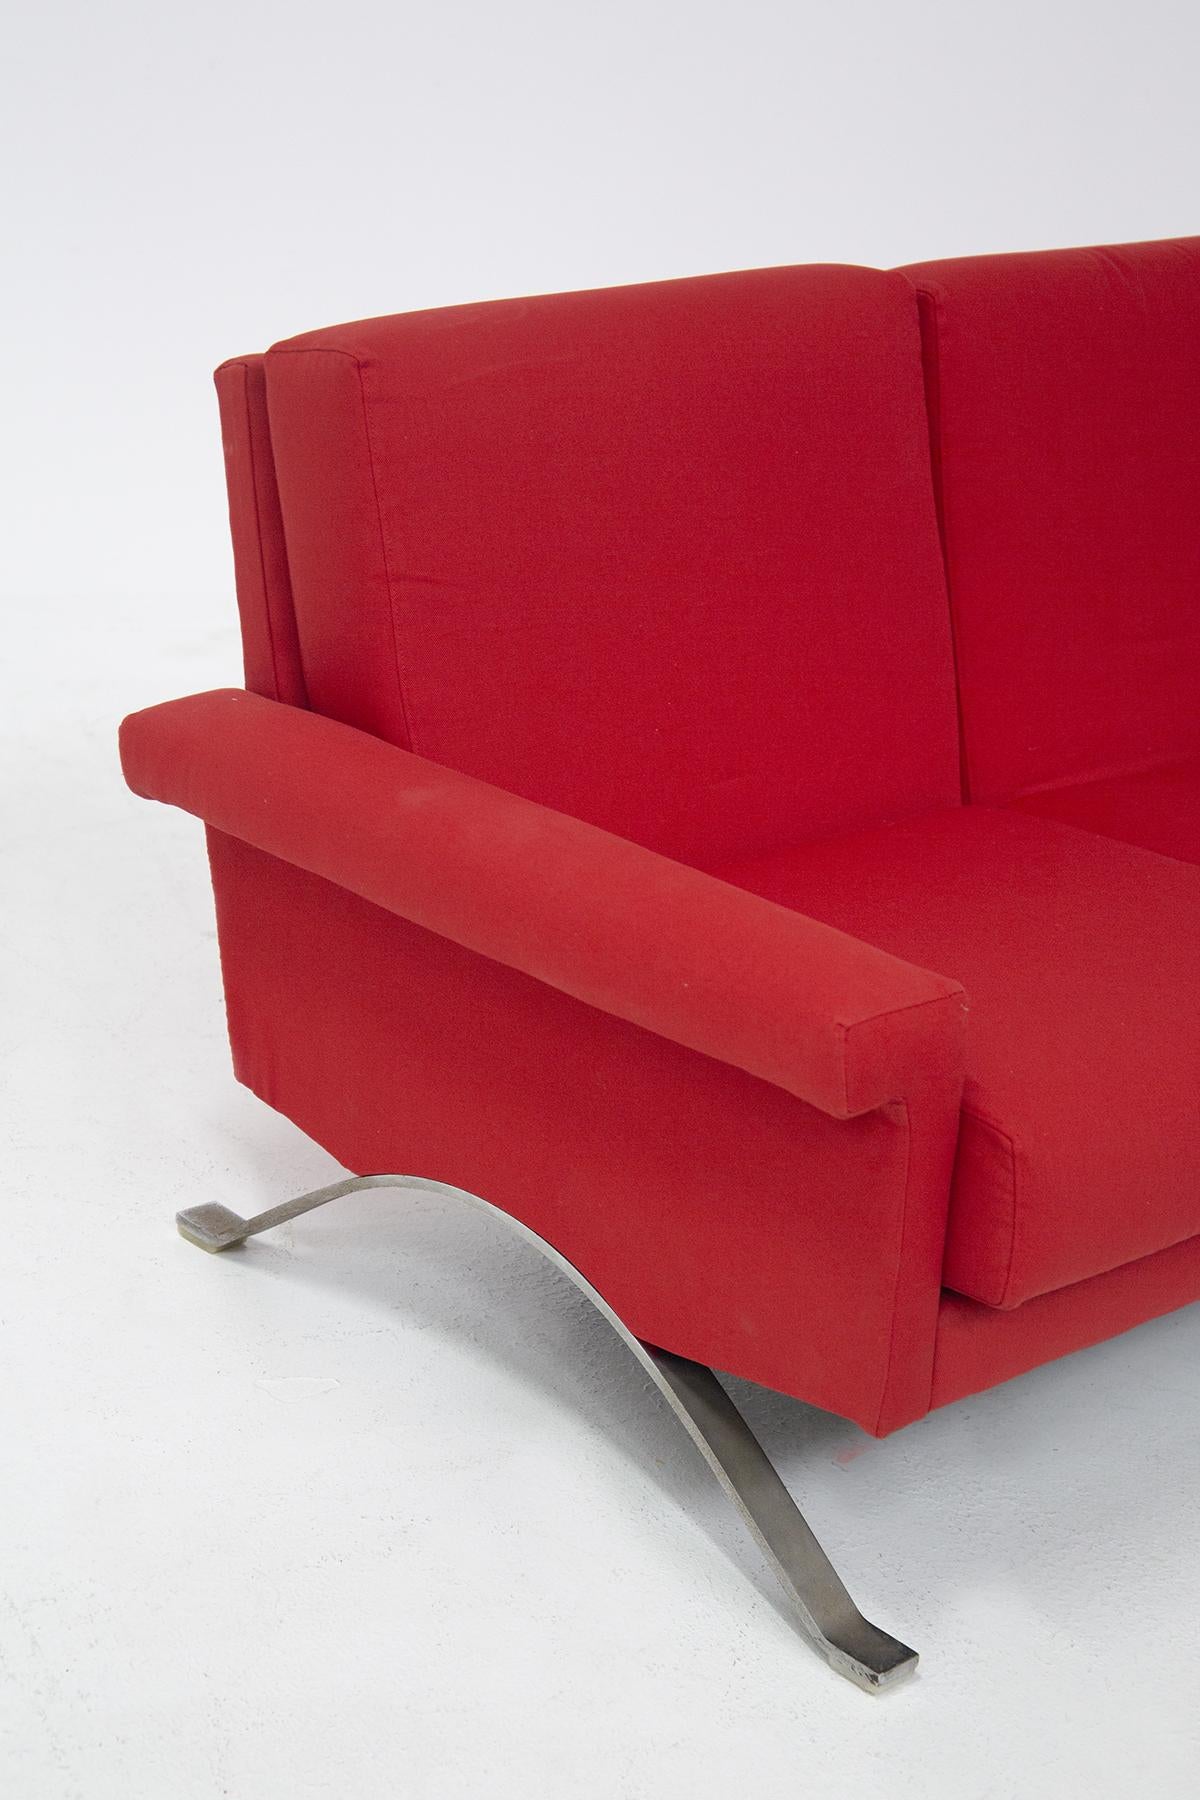 Rare Italian Red Sofa by Ico Parisi for Cassina Mod. 875, Published For Sale 1